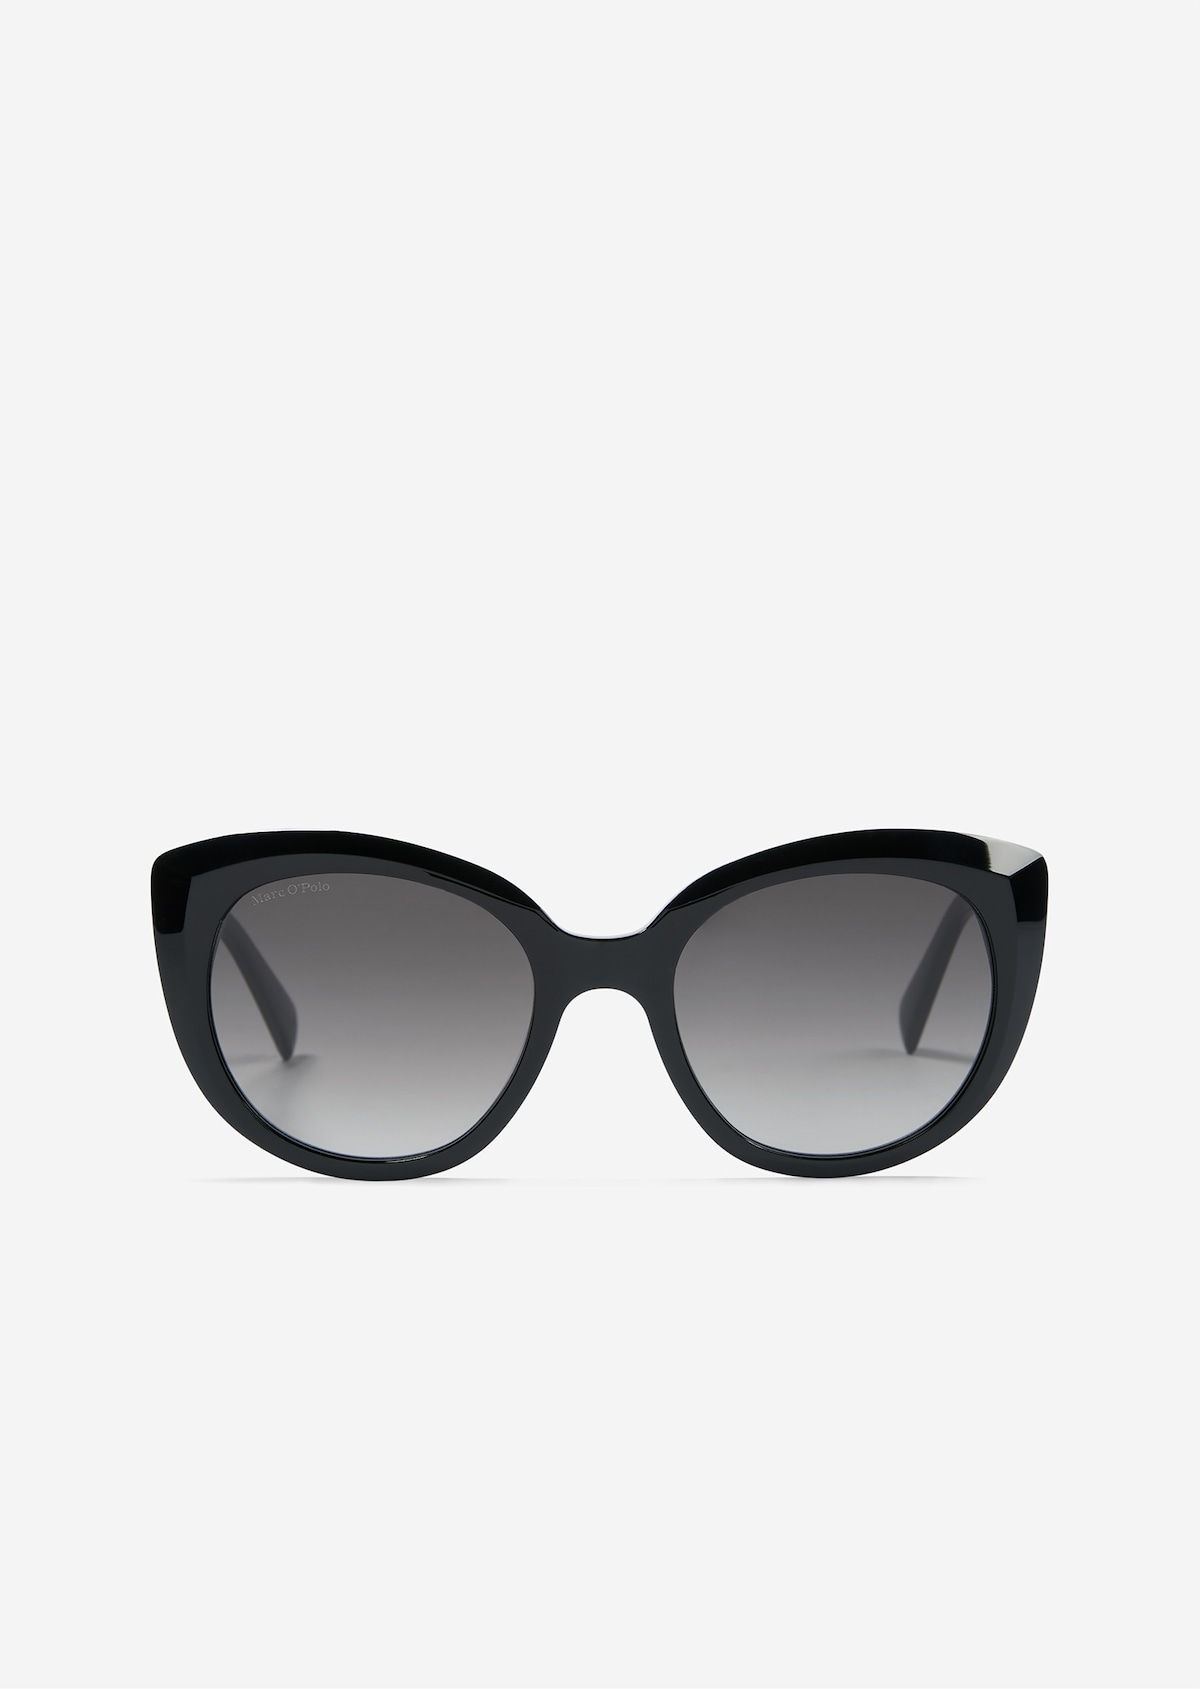 Women's butterfly sunglasses With sturdy acetate frames - black | Sunglasses  | MARC O'POLO